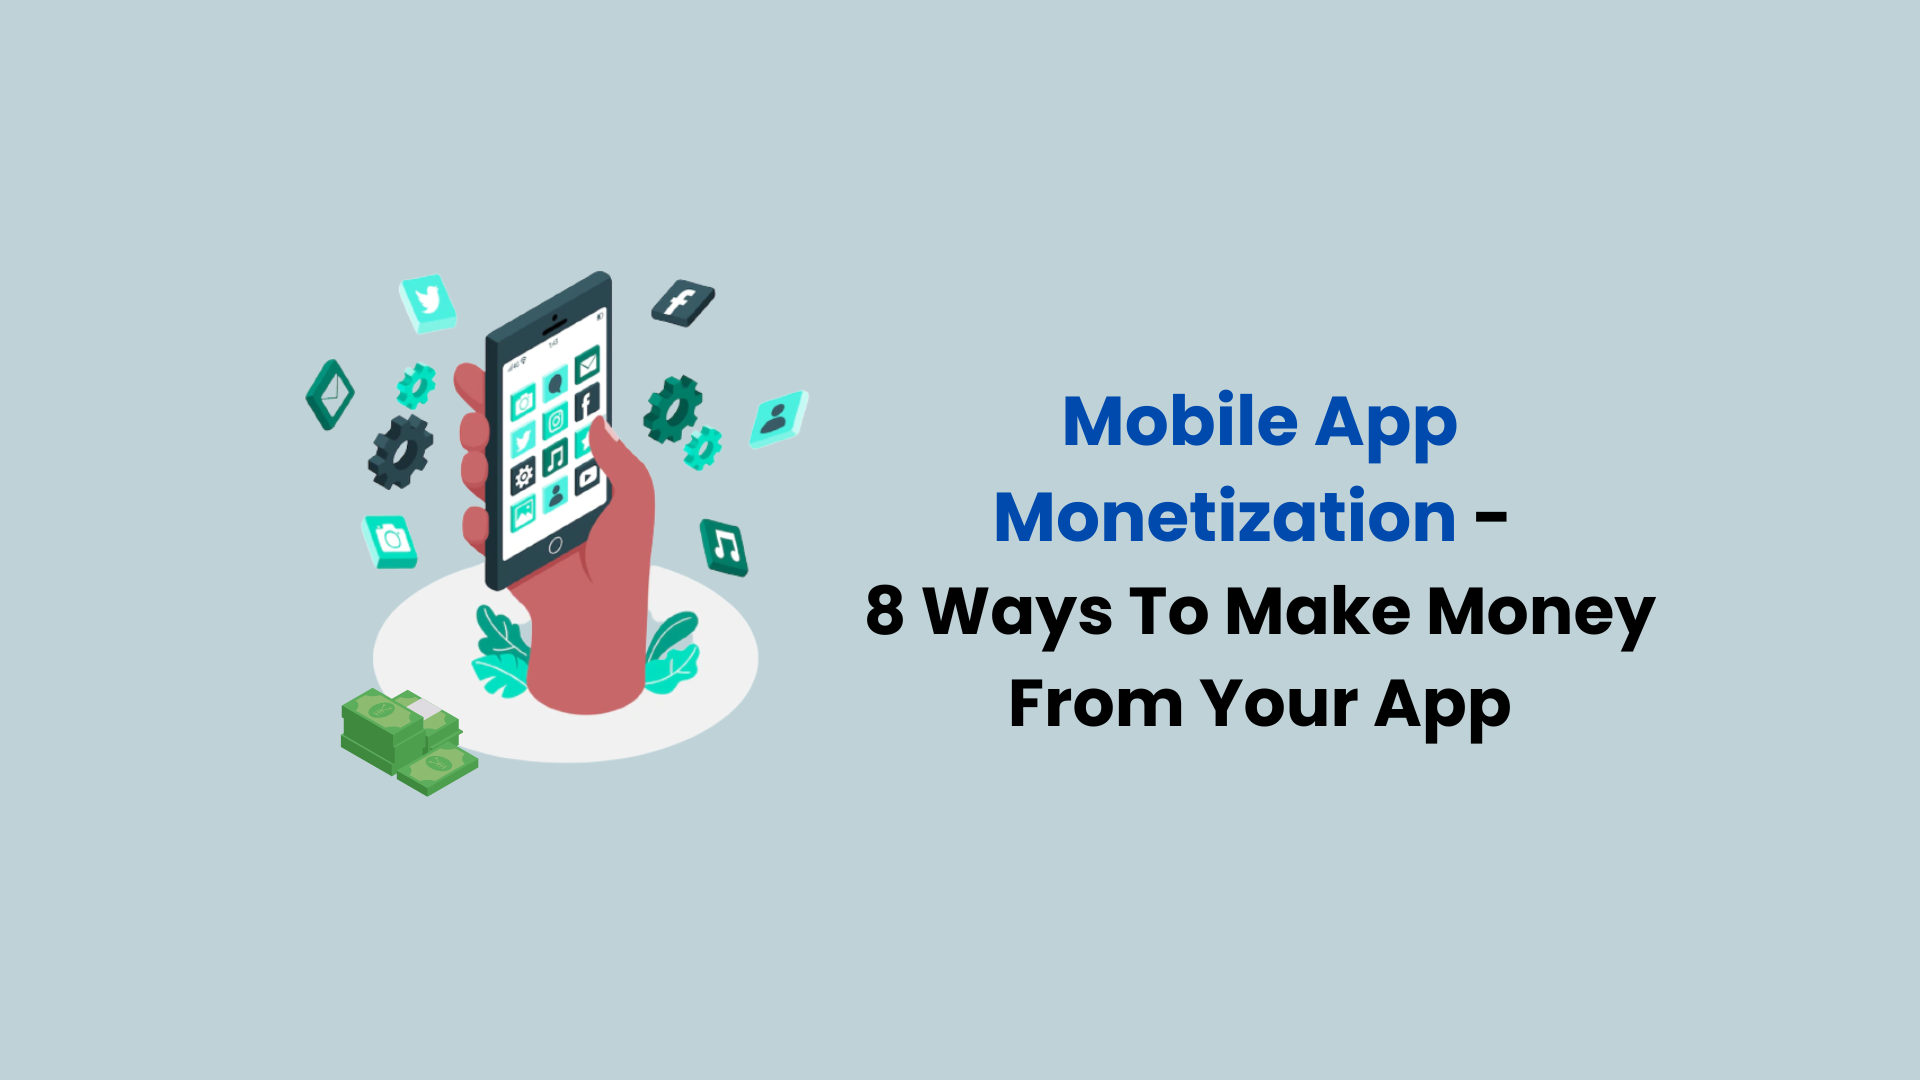 Mobile App Monetization - 8 Ways To Make Money From Your App